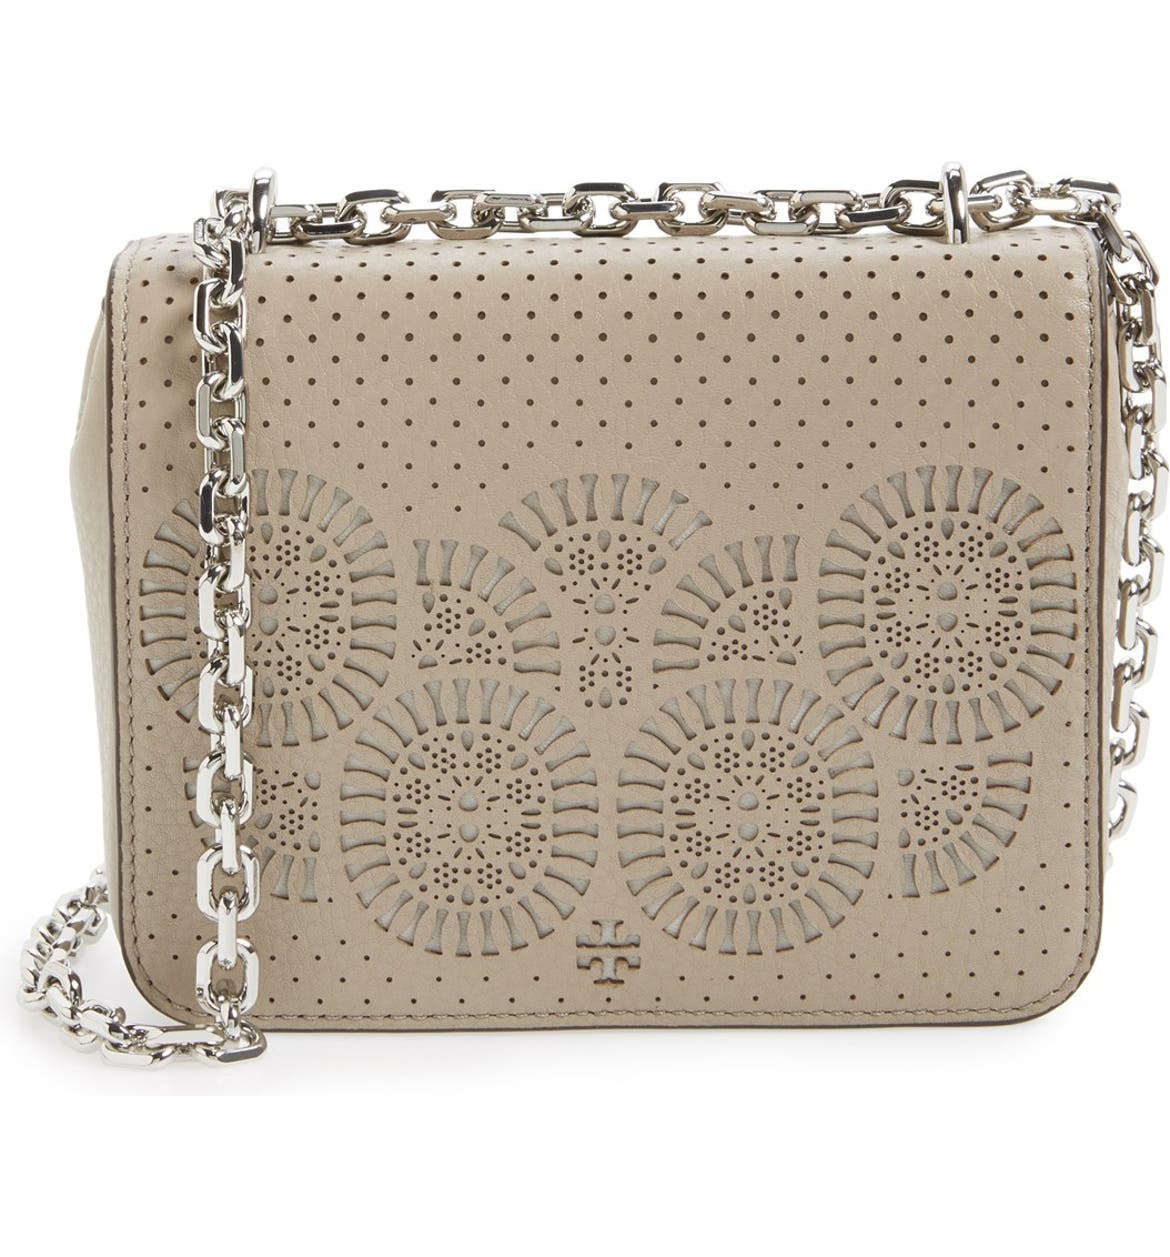 Tory Burch 'Zoey' Perforated Leather Shoulder Bag | Nordstrom